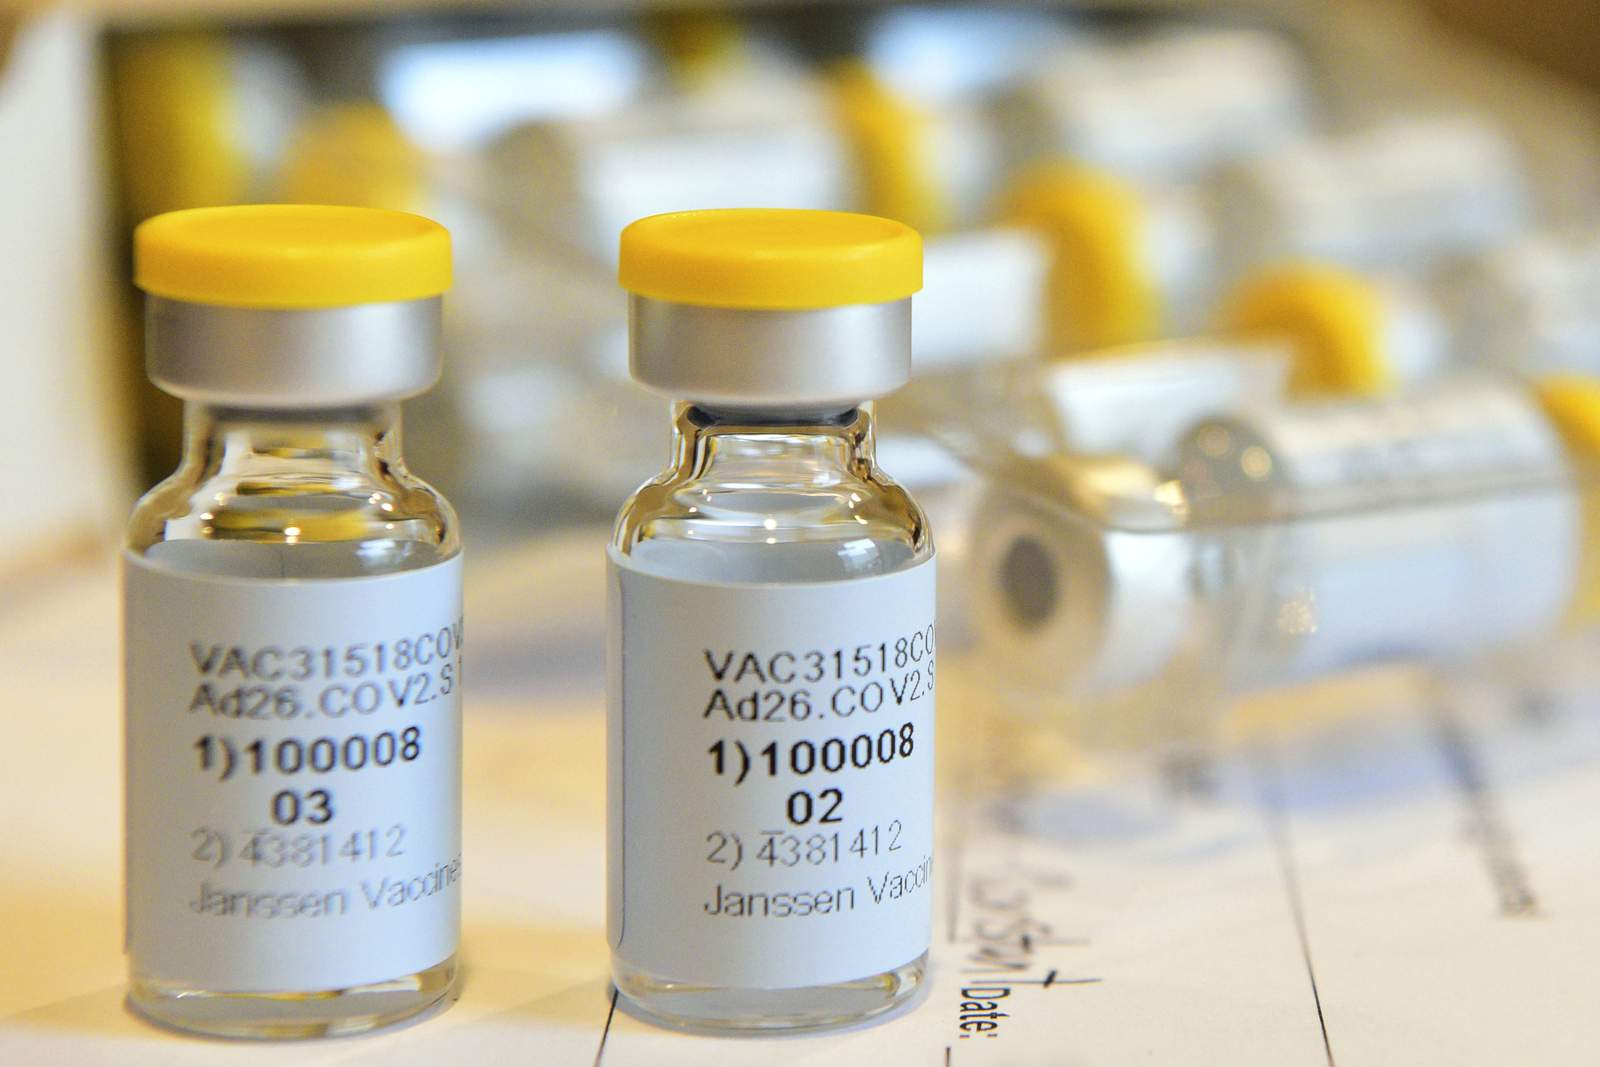 Here’s what we know about Florida’s plan to distribute a COVID-19 vaccine